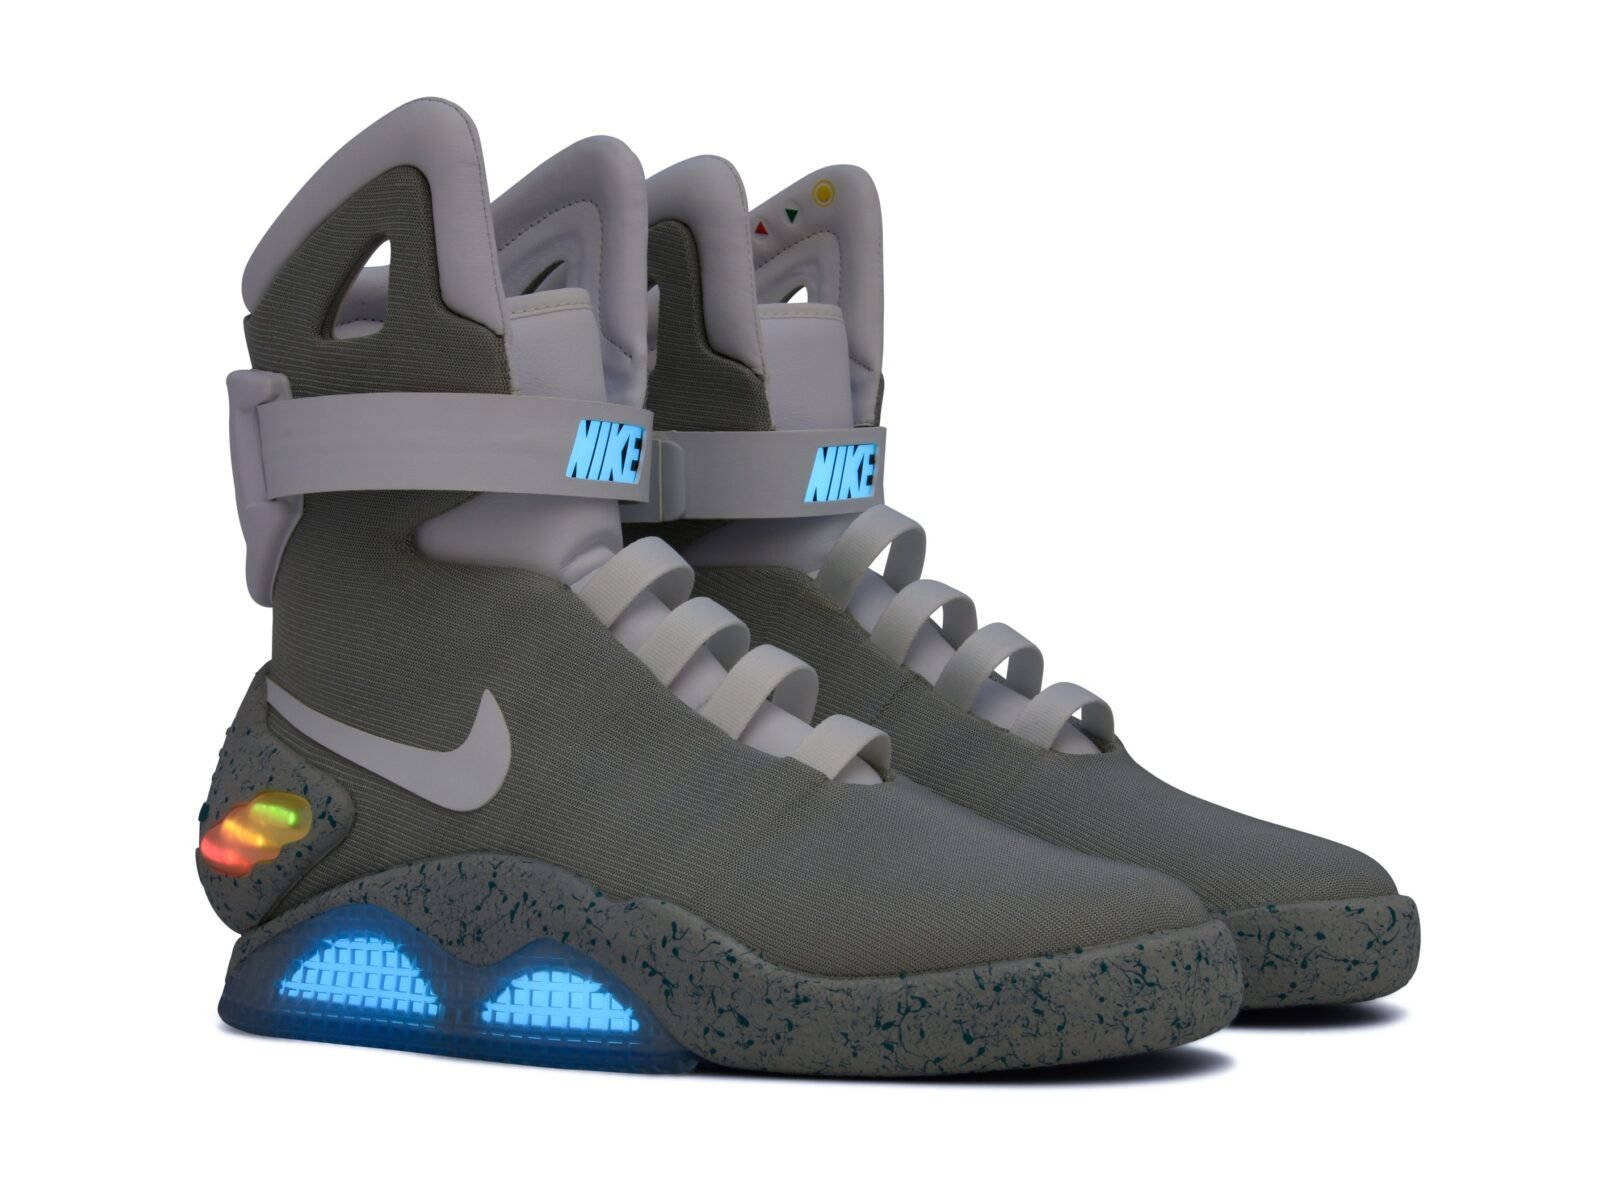 Nike MAG Back to the Future Shoes